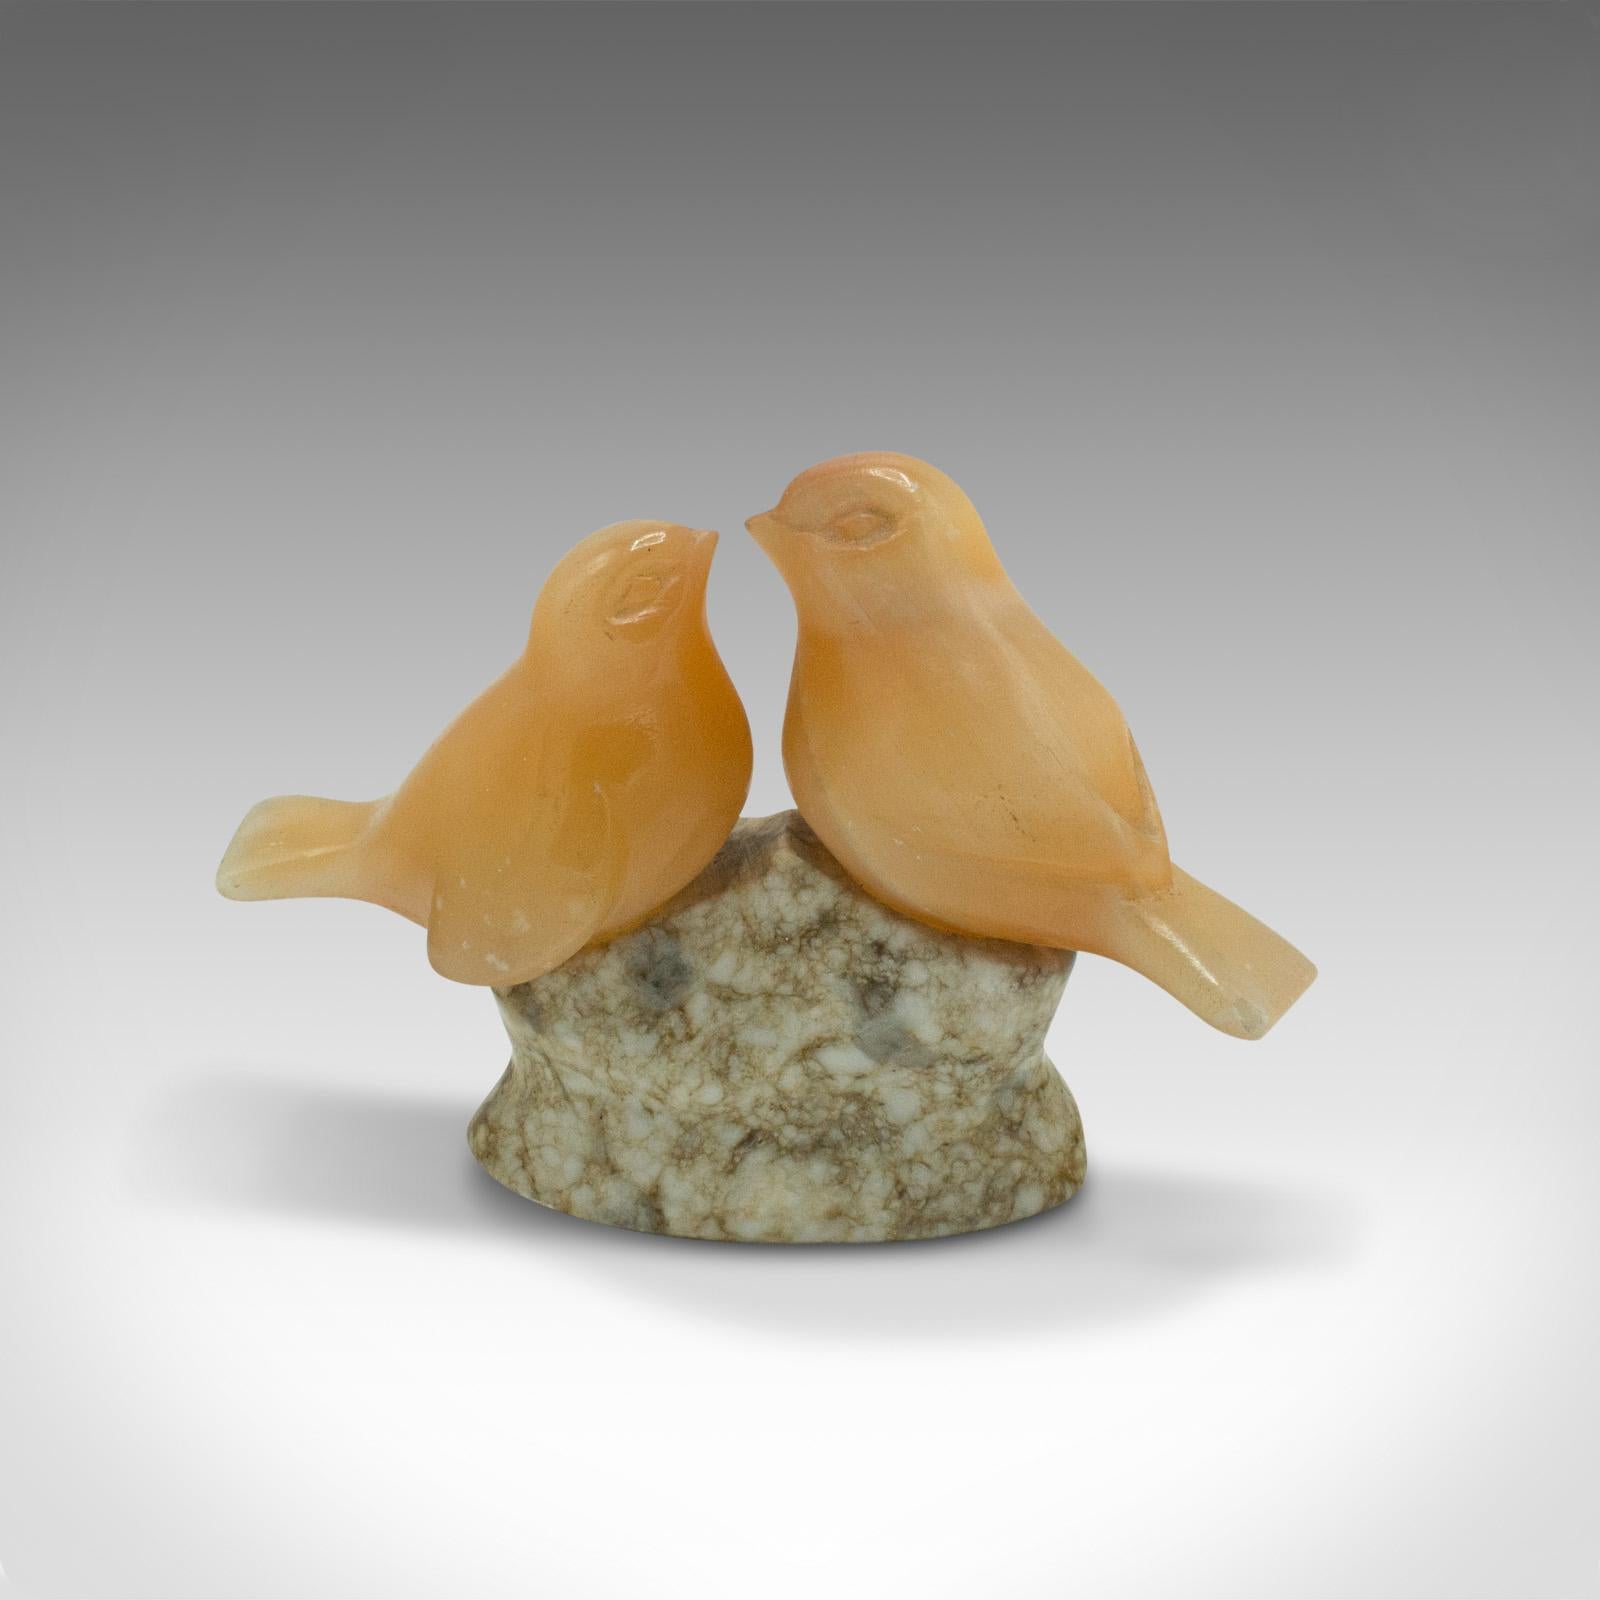 This is a small vintage lovebird ornament. A Japanese, yellow onyx and granite decorative figure, dating to the late Art Deco period, circa 1940.

Delightfully sweet decorative item, a treat for lovers or collectors.
Displaying a desirable aged